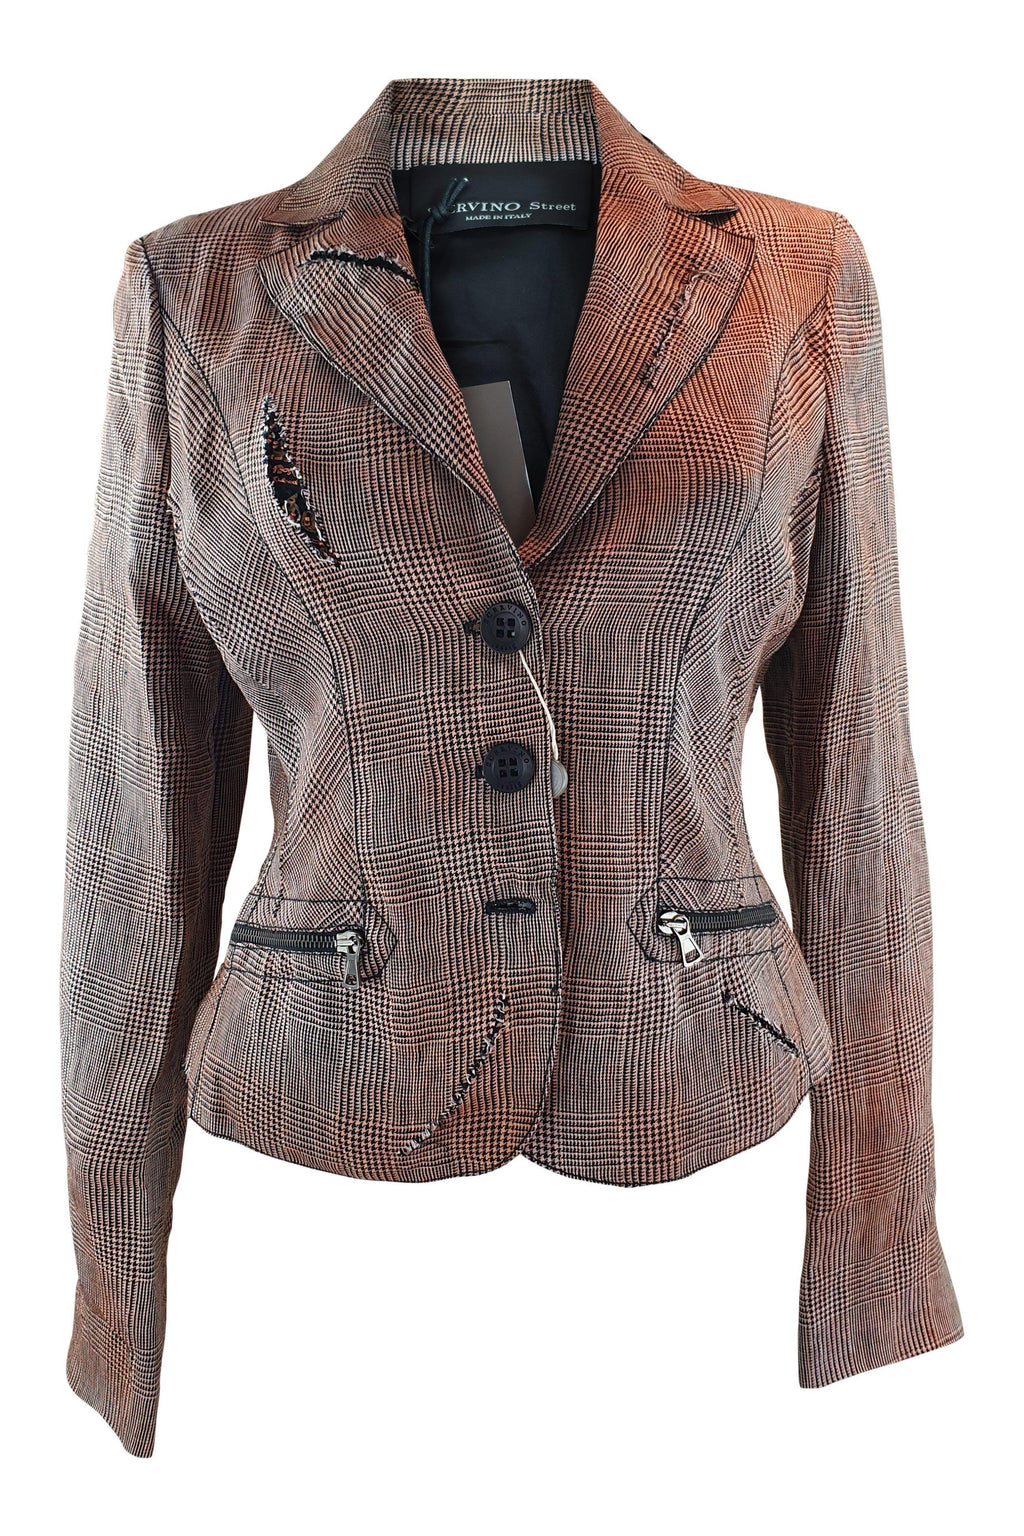 SCERVINO STREET Ermanno Scervino Brown Fitted Jacket (US 8)-Ermanno Scervino-The Freperie